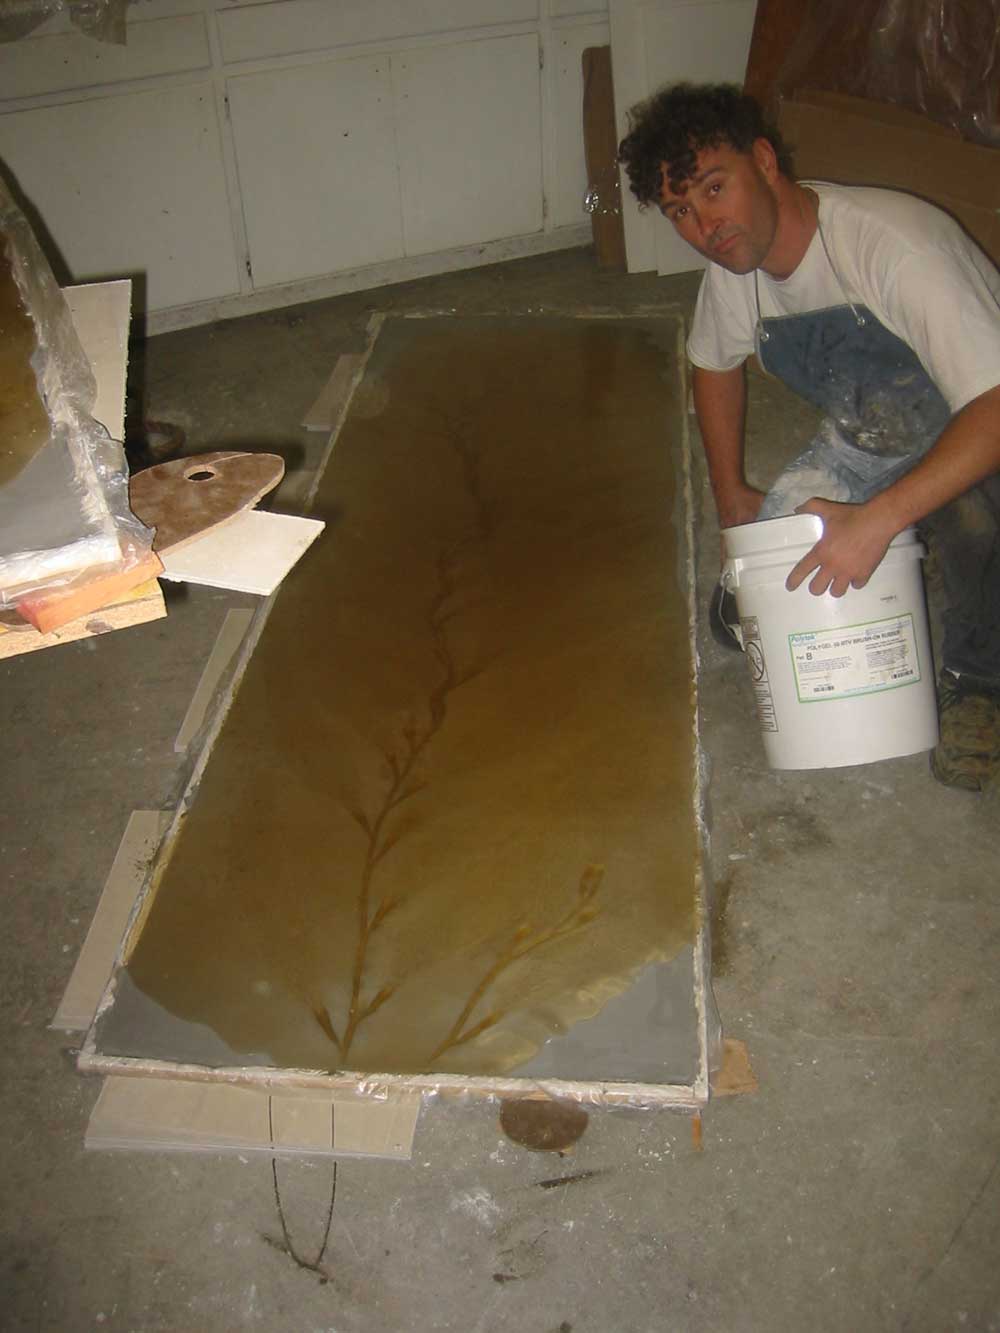 making custom rubber stamps for decorative concrete seaweed floor